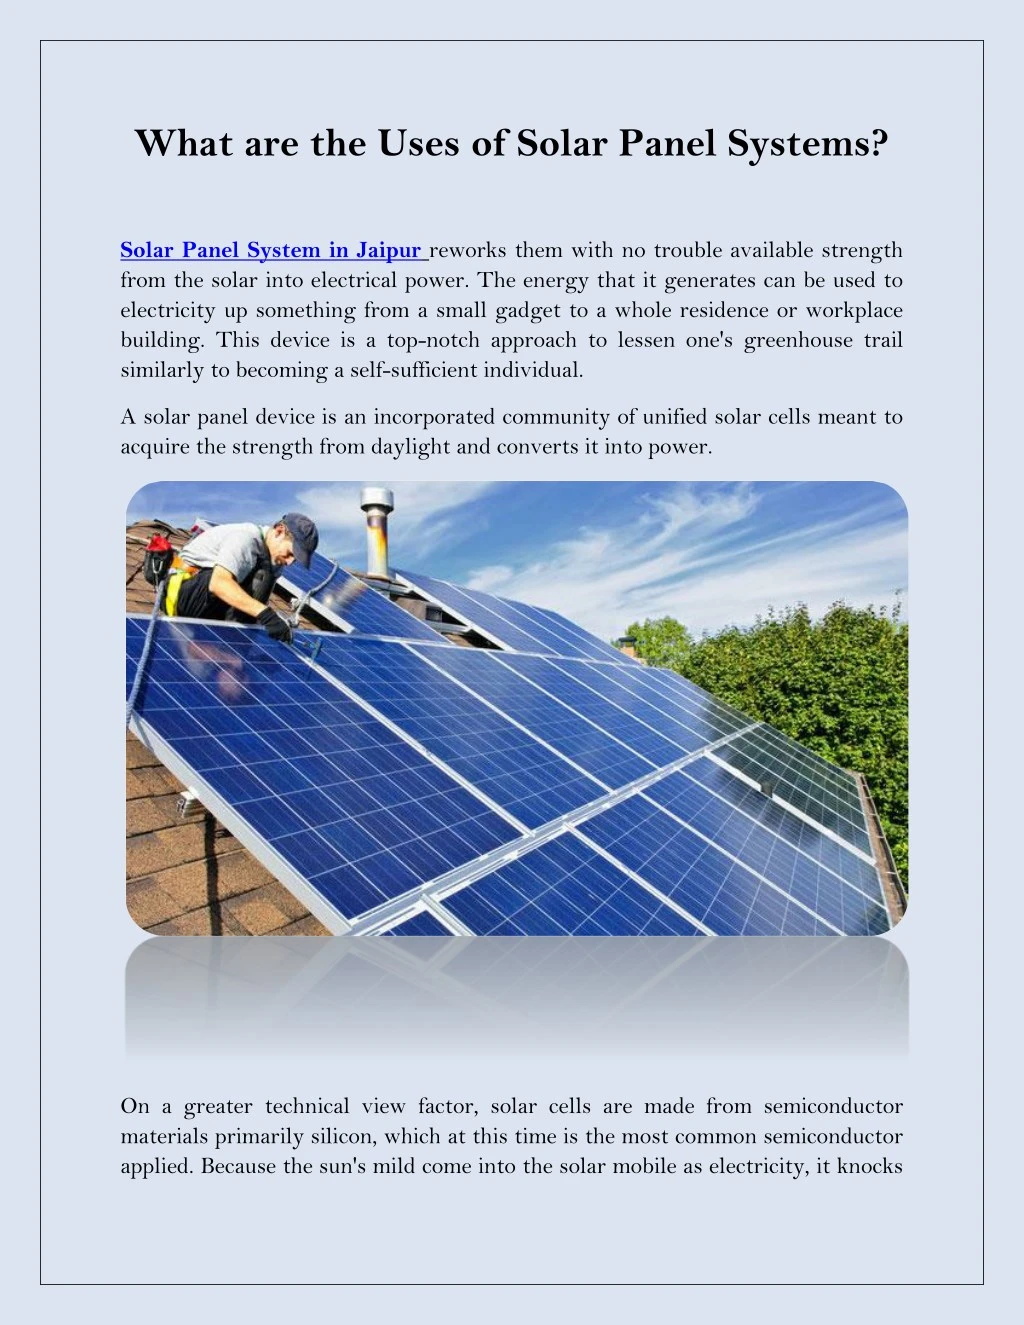 what are the uses of solar panel systems